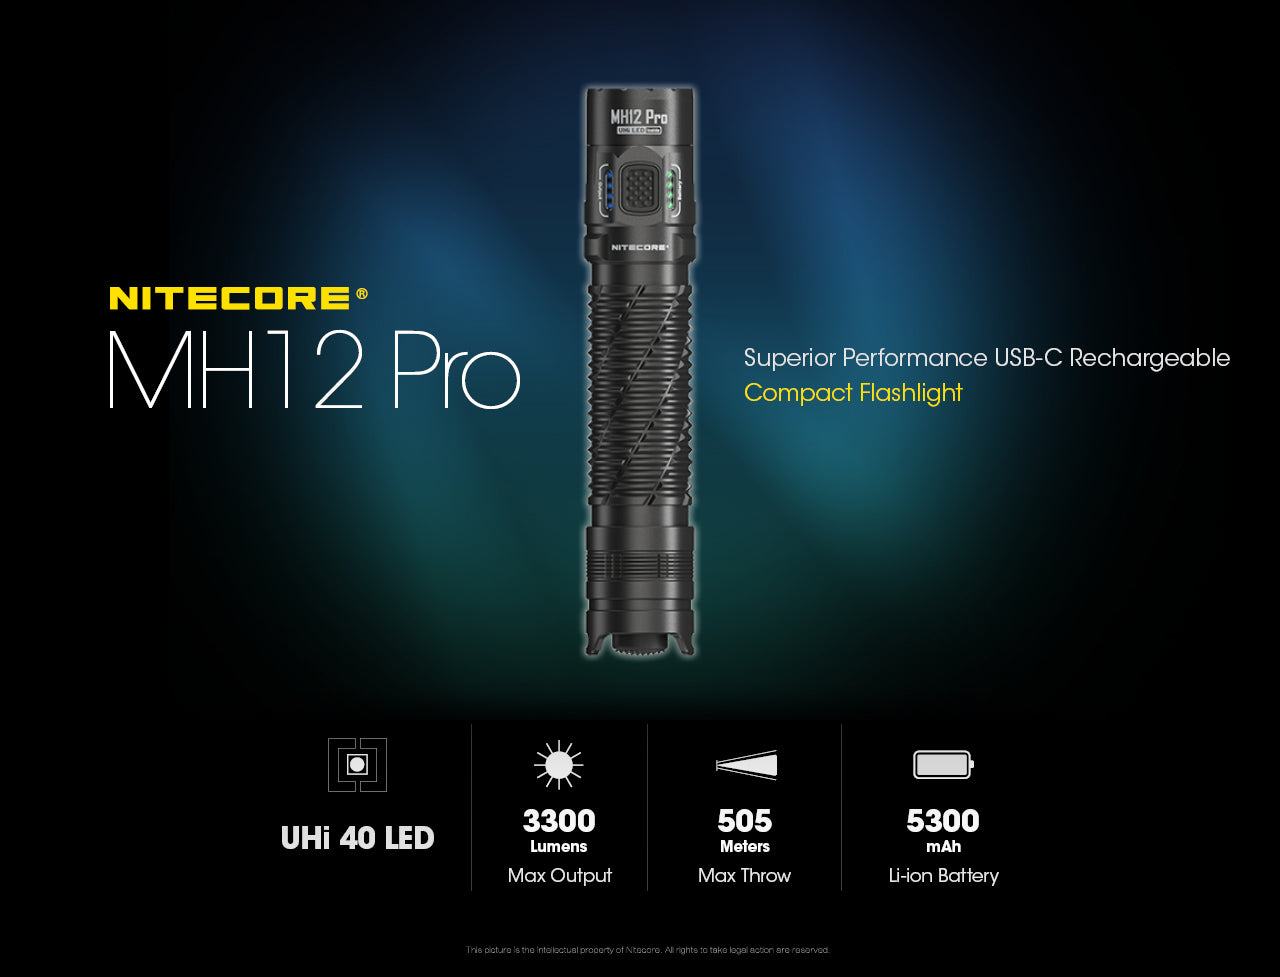 NITECORE MH12 Pro Ultra Long Range Flashlight with a maximum output of 3,300 lumens with sperior performance usb c rechargeable compact flashlight.